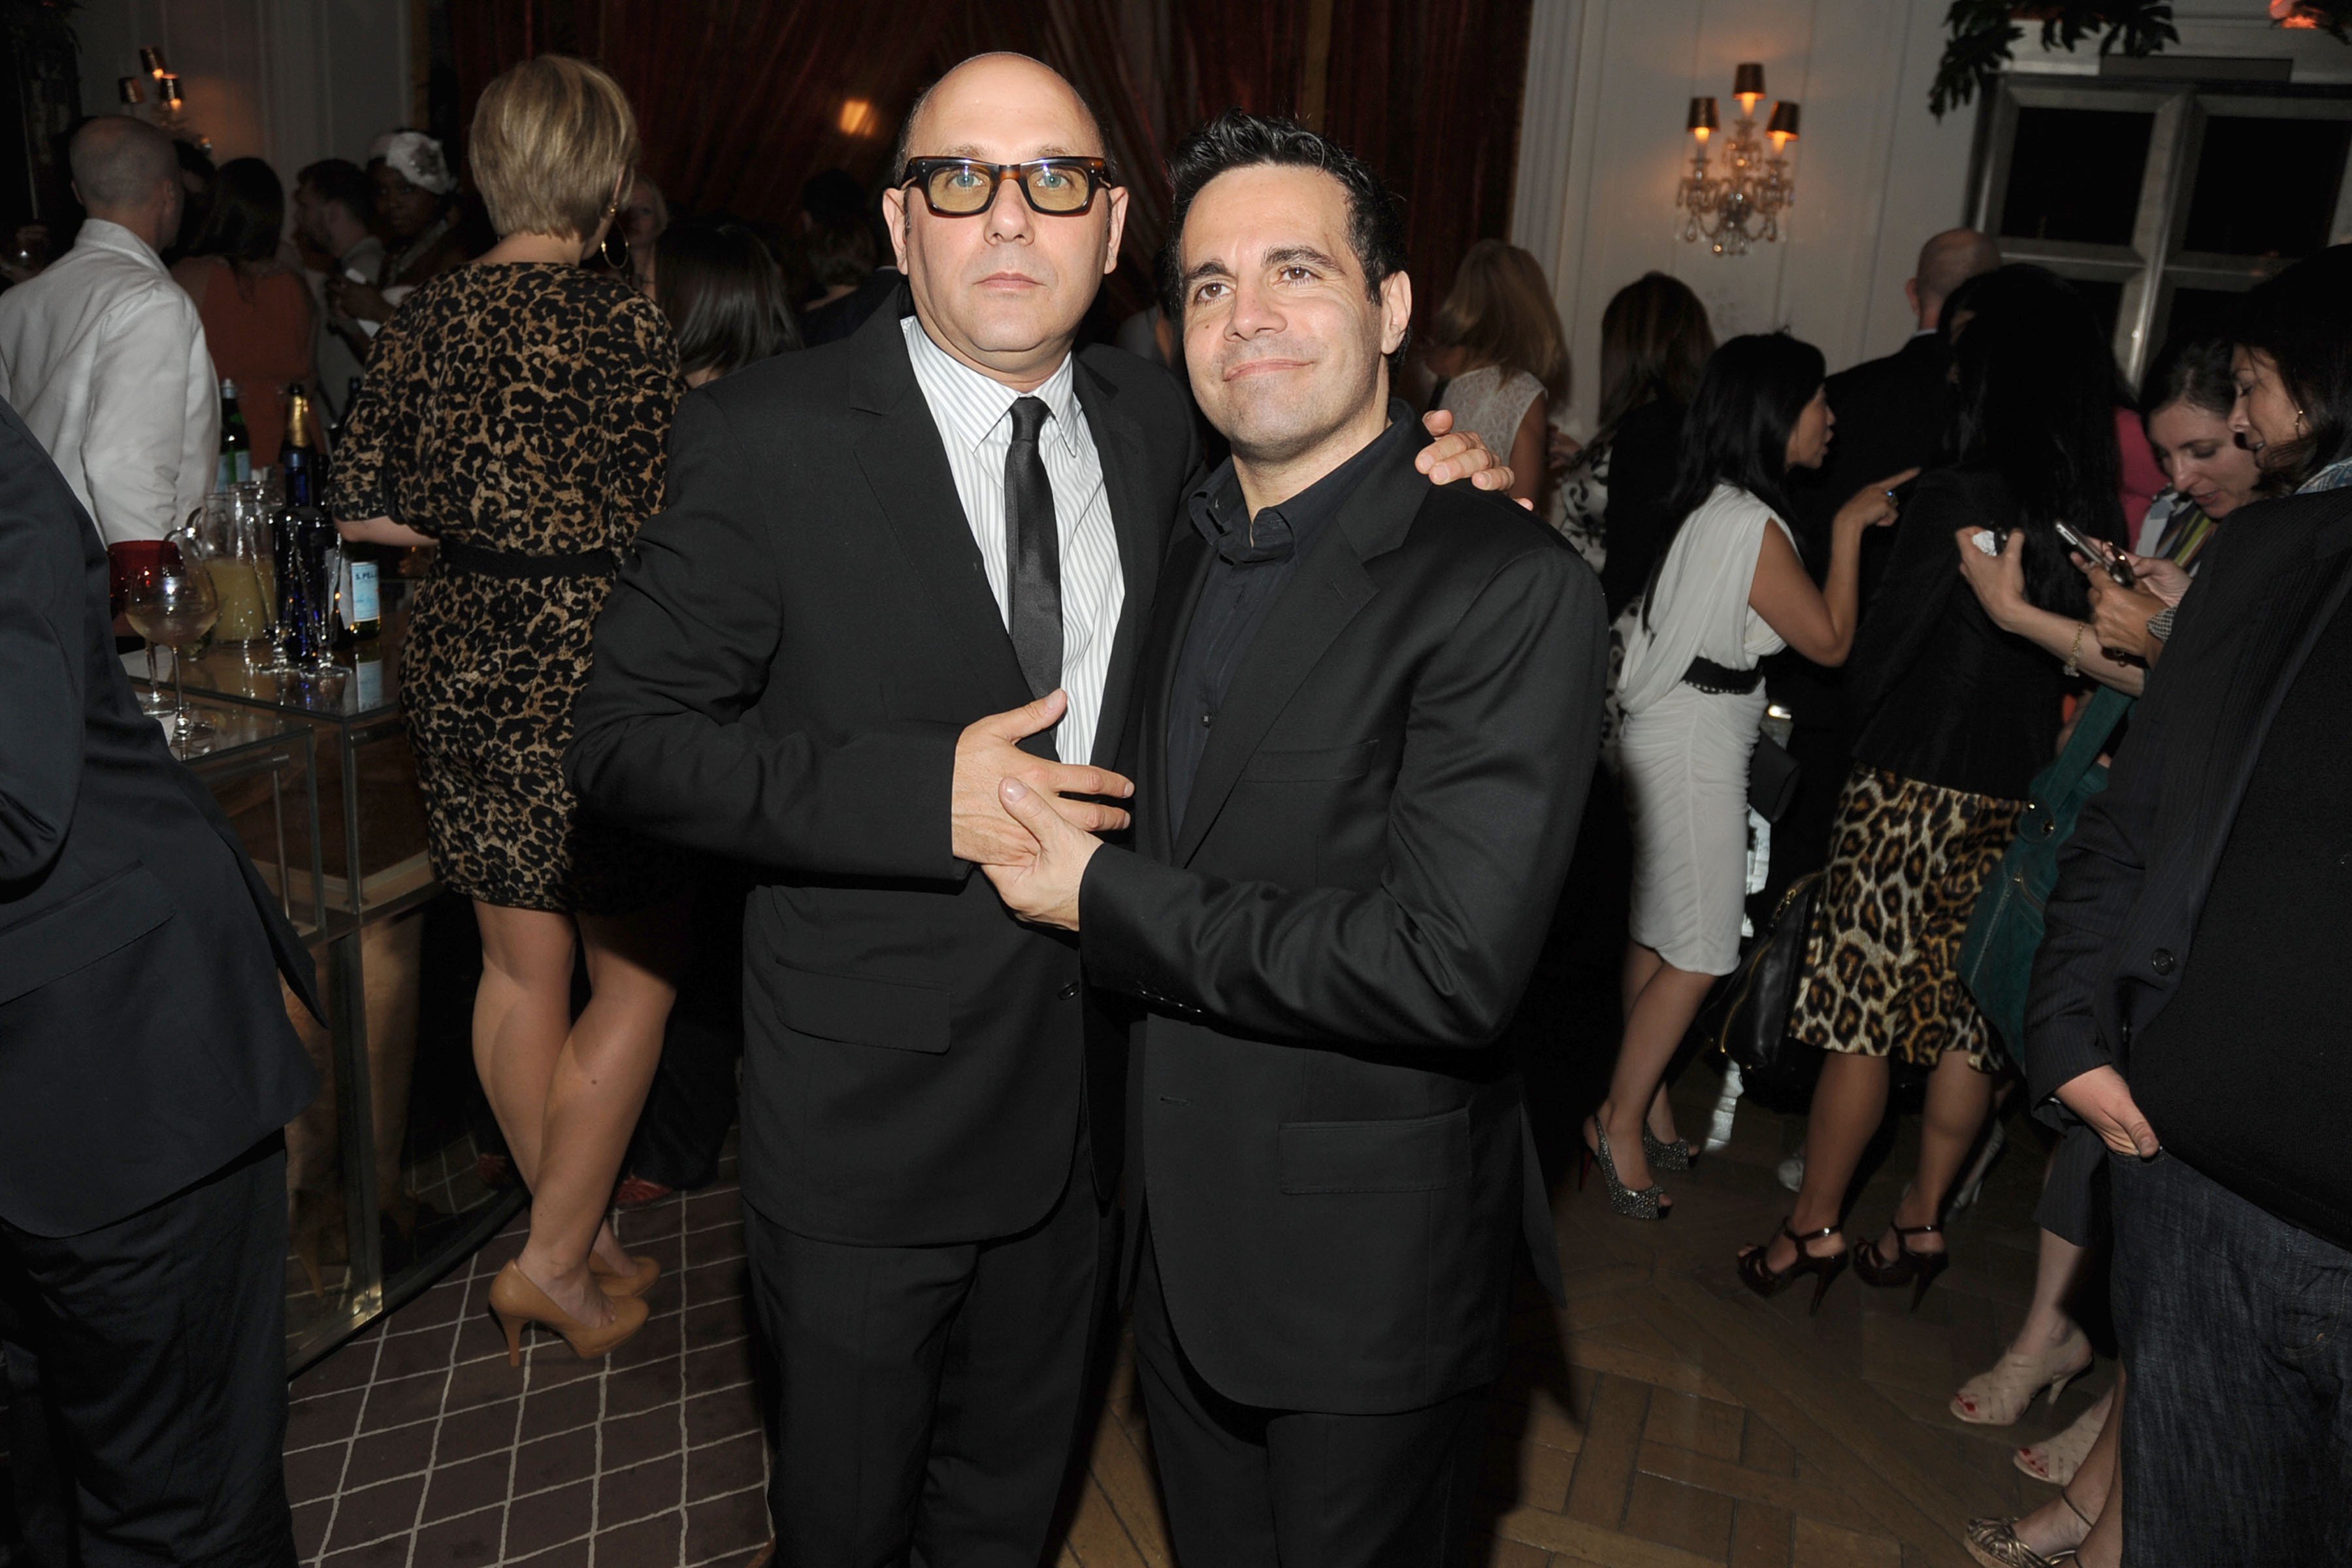 Willie Garson and Mario Cantone pose together at the 'Sex and the City 2' After Party at Bergdorf Goodman in 2010